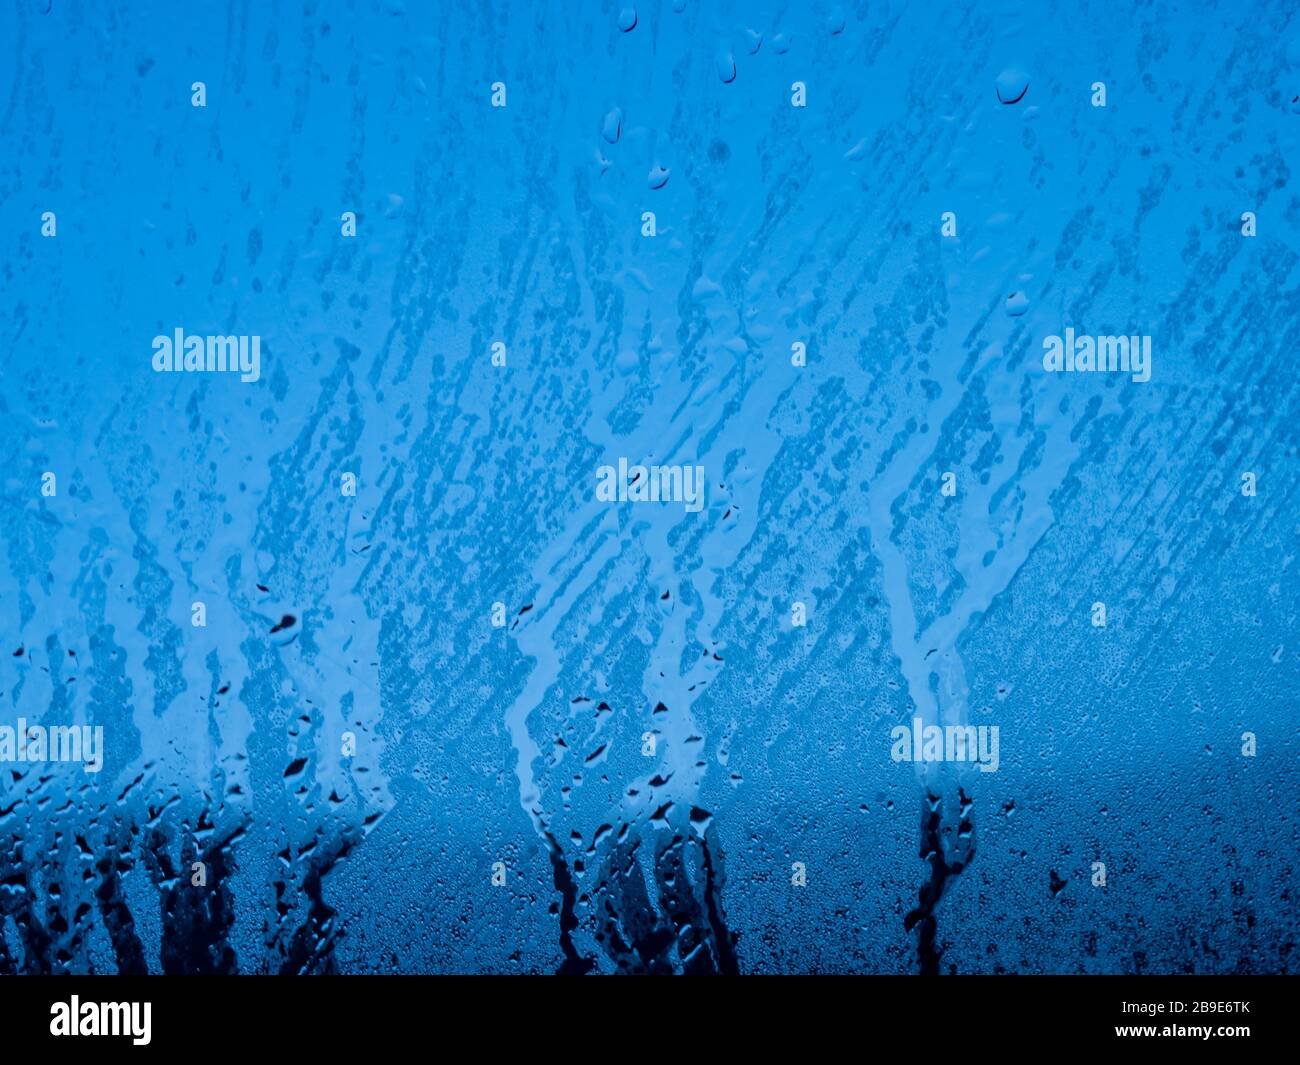 Condensation water drop on the blue glass window. Rain. Abstract background texture. Stock Photo